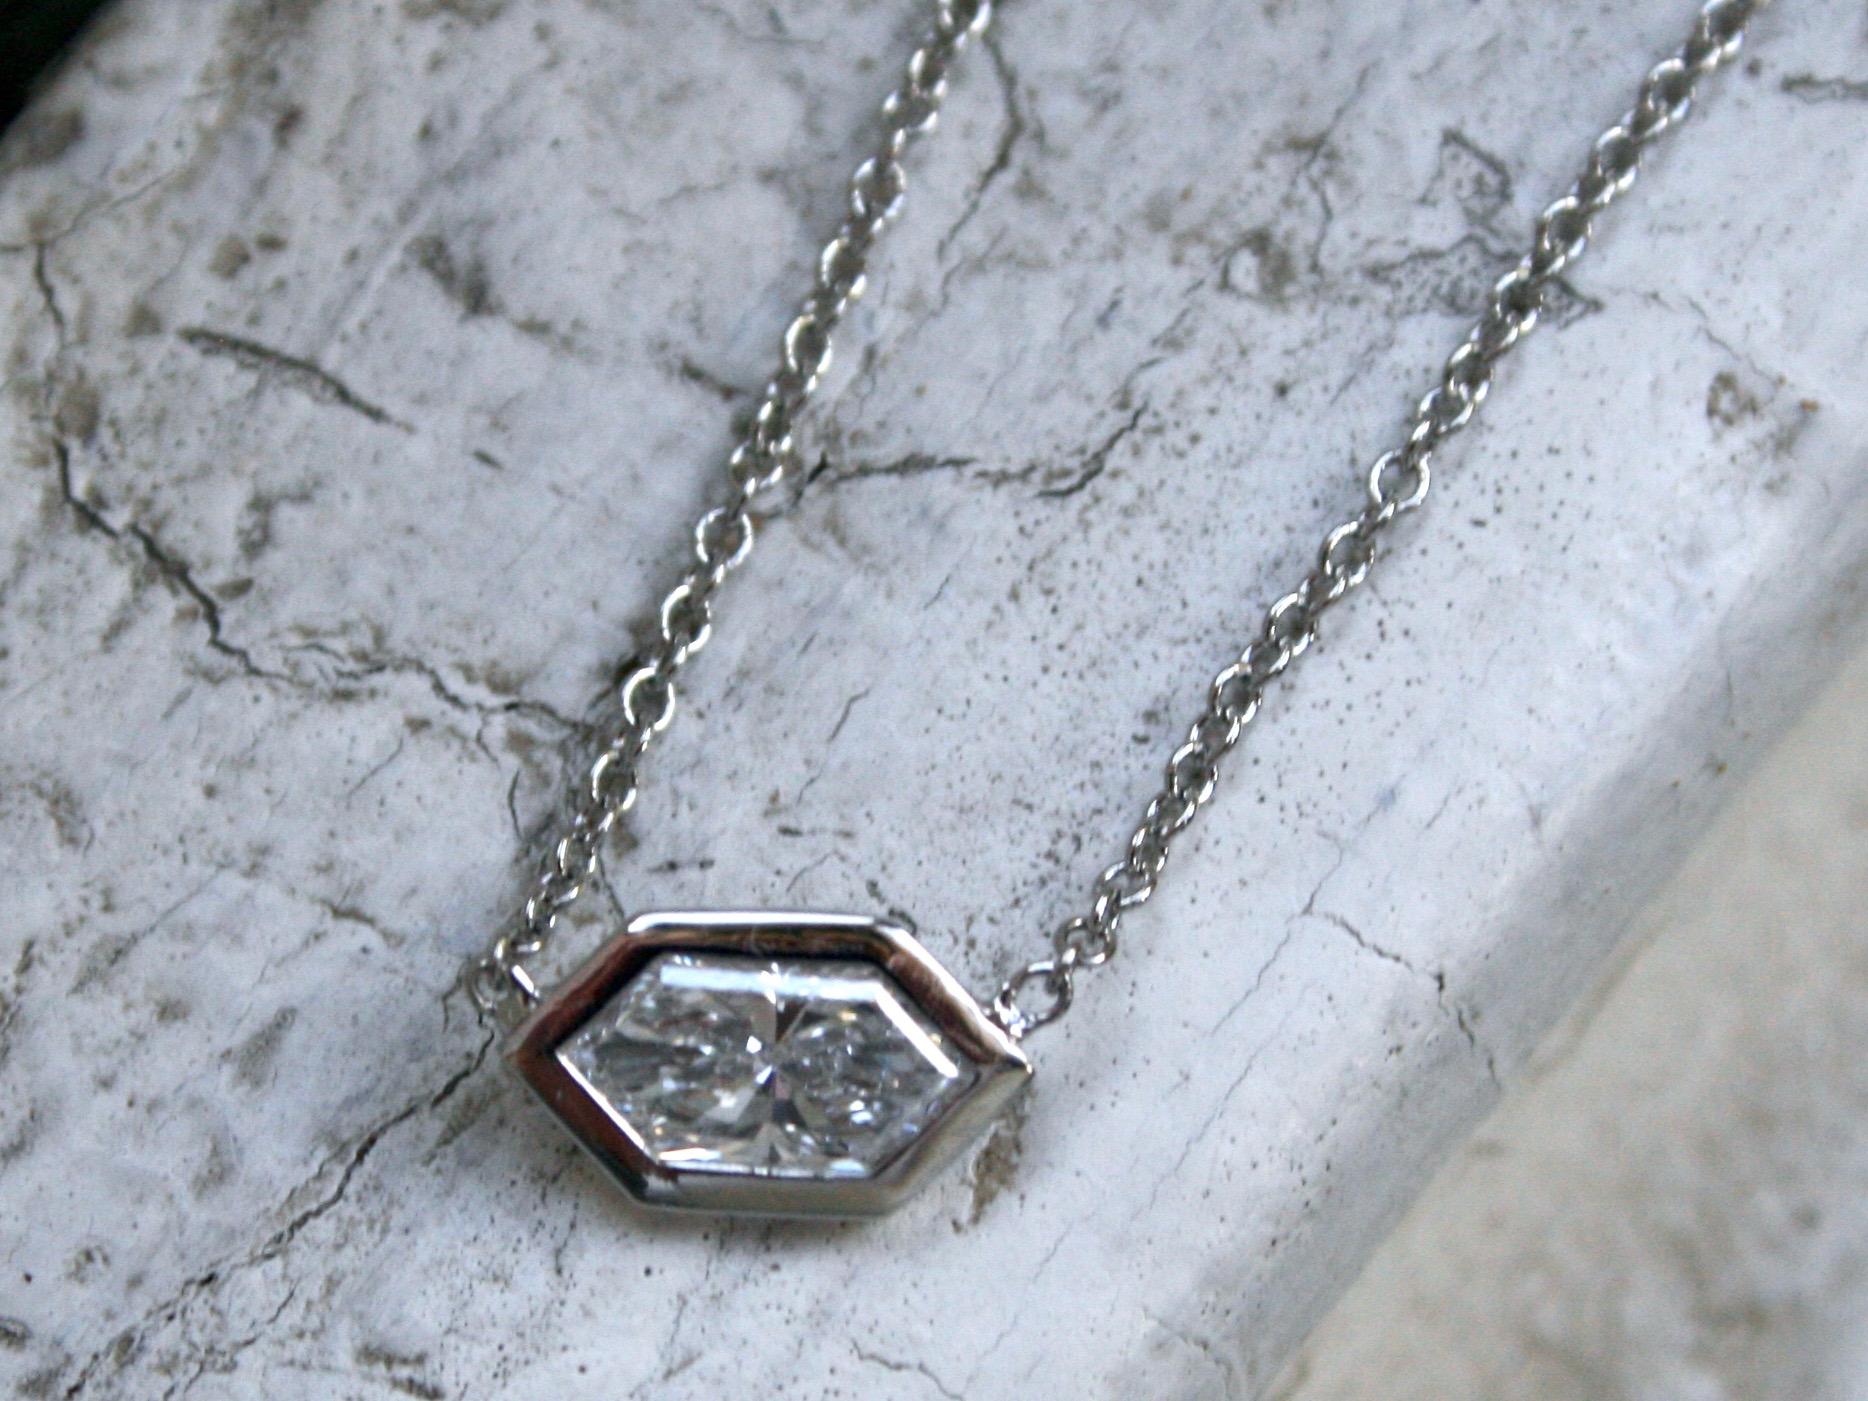 I so love this Fantastic Platinum Diamond Solitaire Pendant - if I didn't already have one, this would be on my neck! The design is simple bezel set diamond on a classic link chain. In the center, the pedant hold one Hexagon Cut Diamond, 0.50ct in